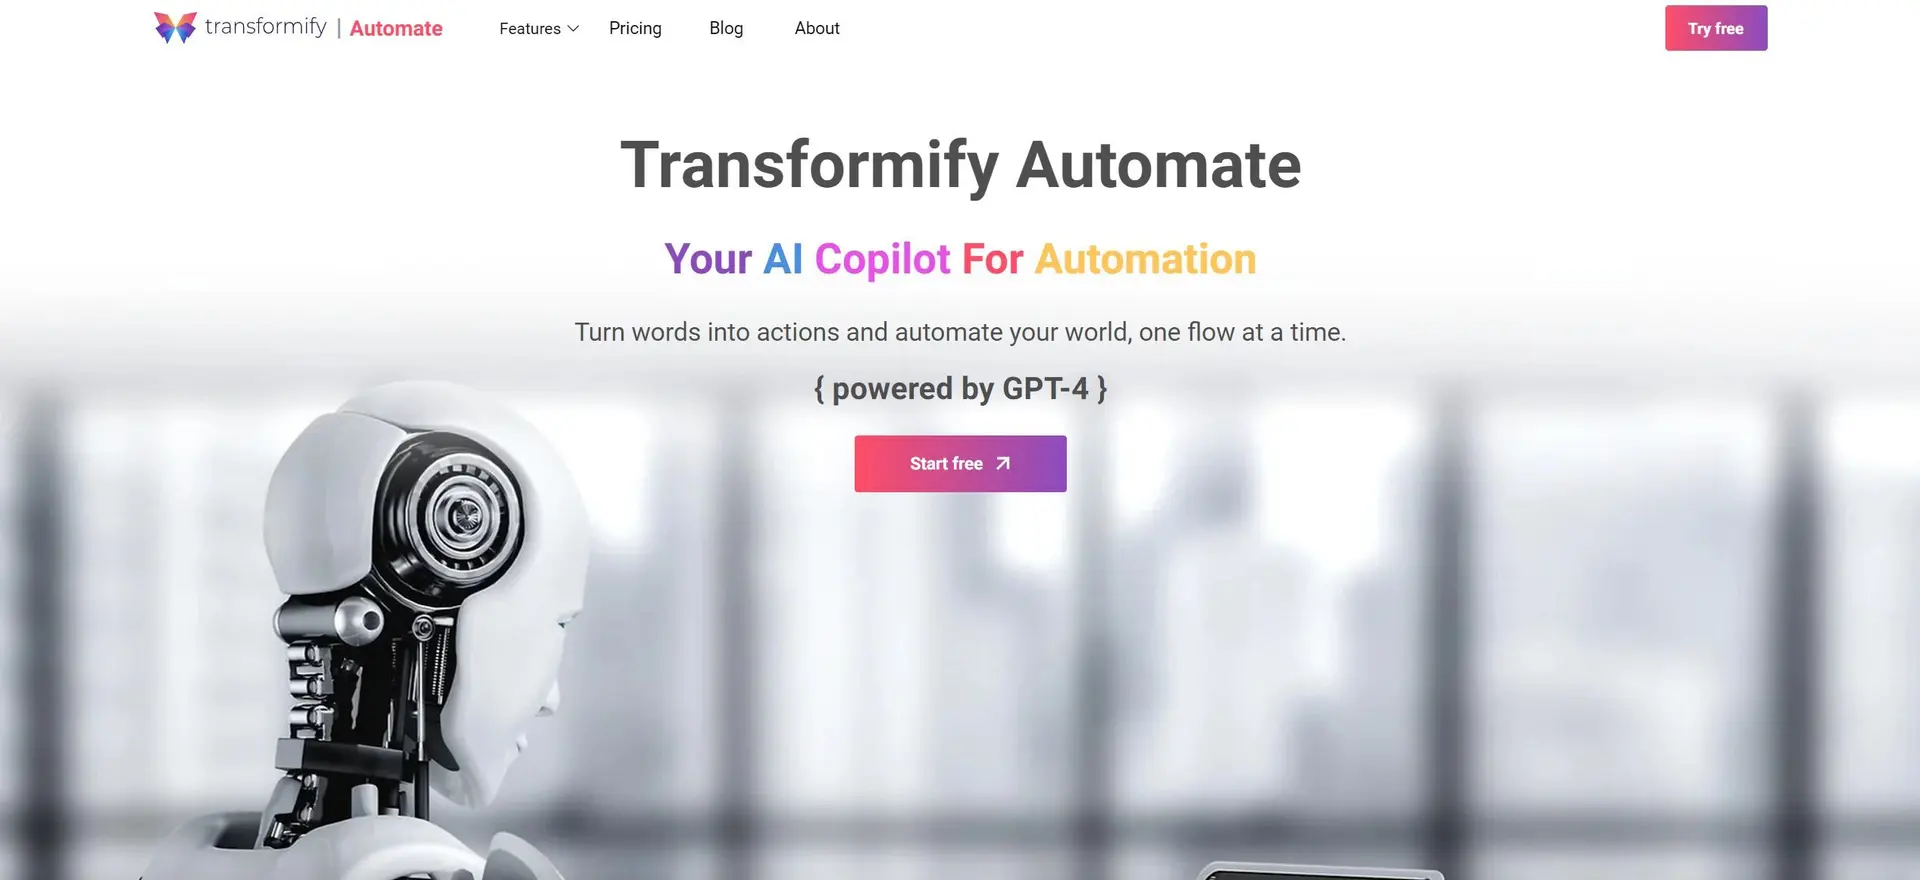 Transformify Automatewebsite picture